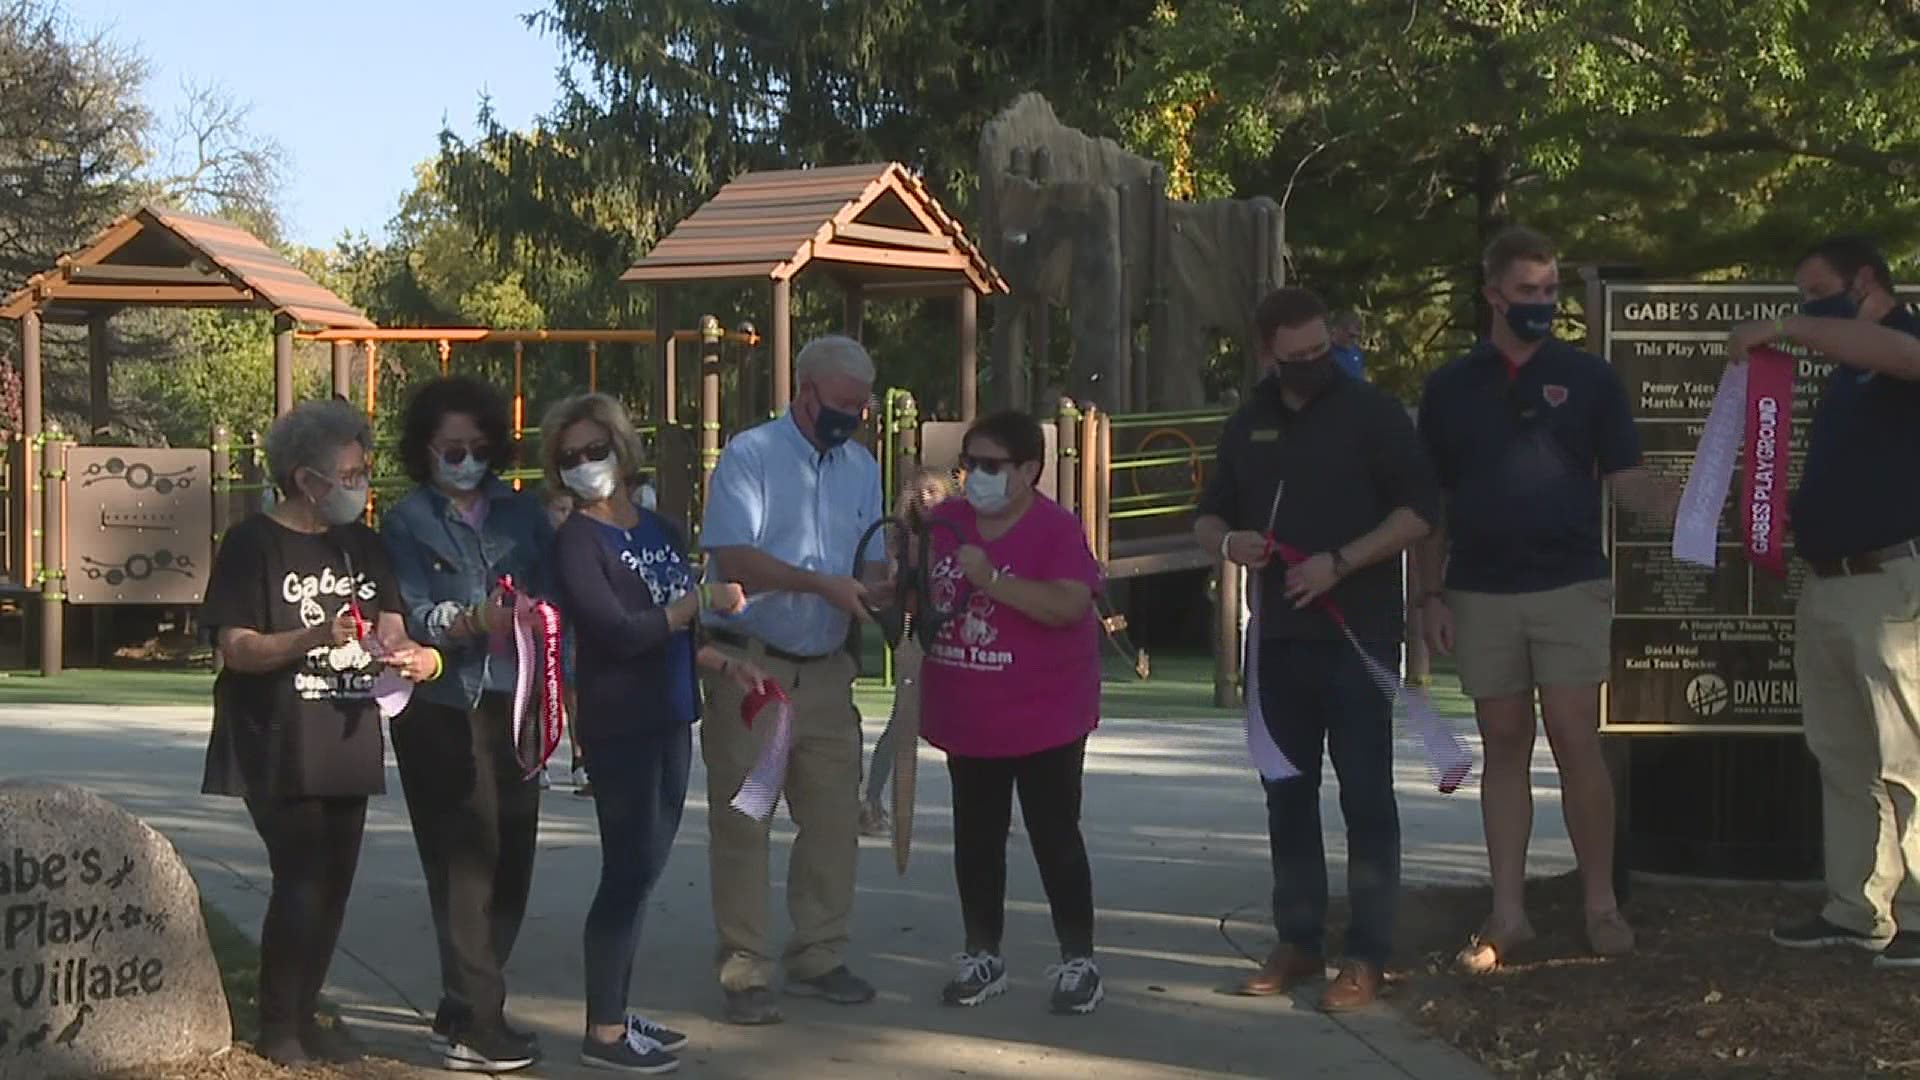 The ribbon-cutting ceremony to officially open the ability-inclusive park happened on Thursday afternoon.